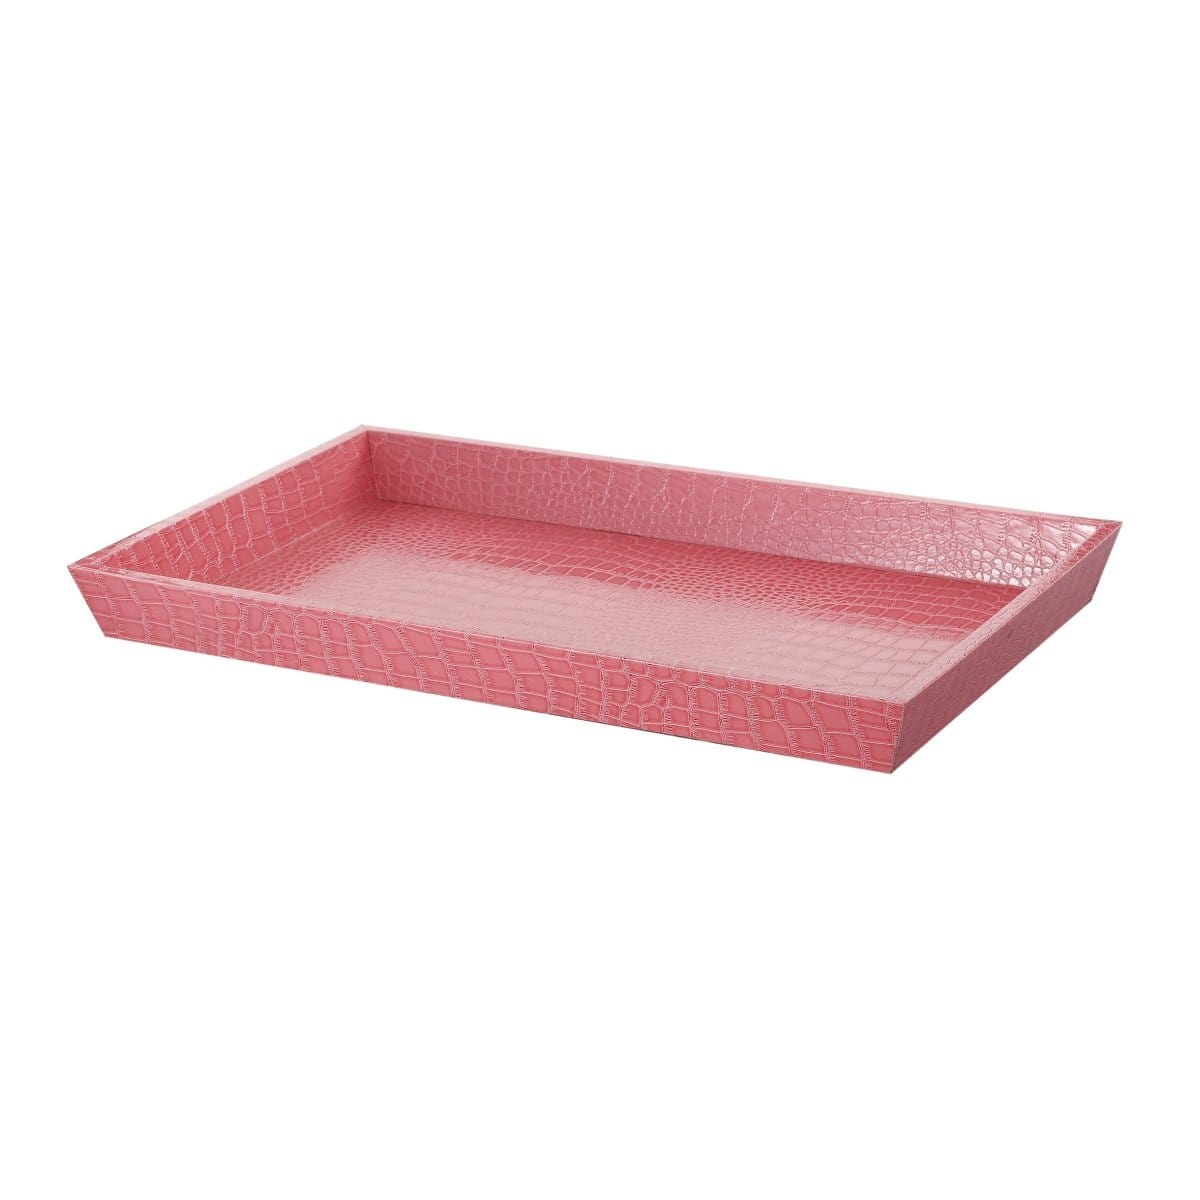 AB-39278 URBAN VOGUE  FAUX LEATHER TRAY PINK picket and rail